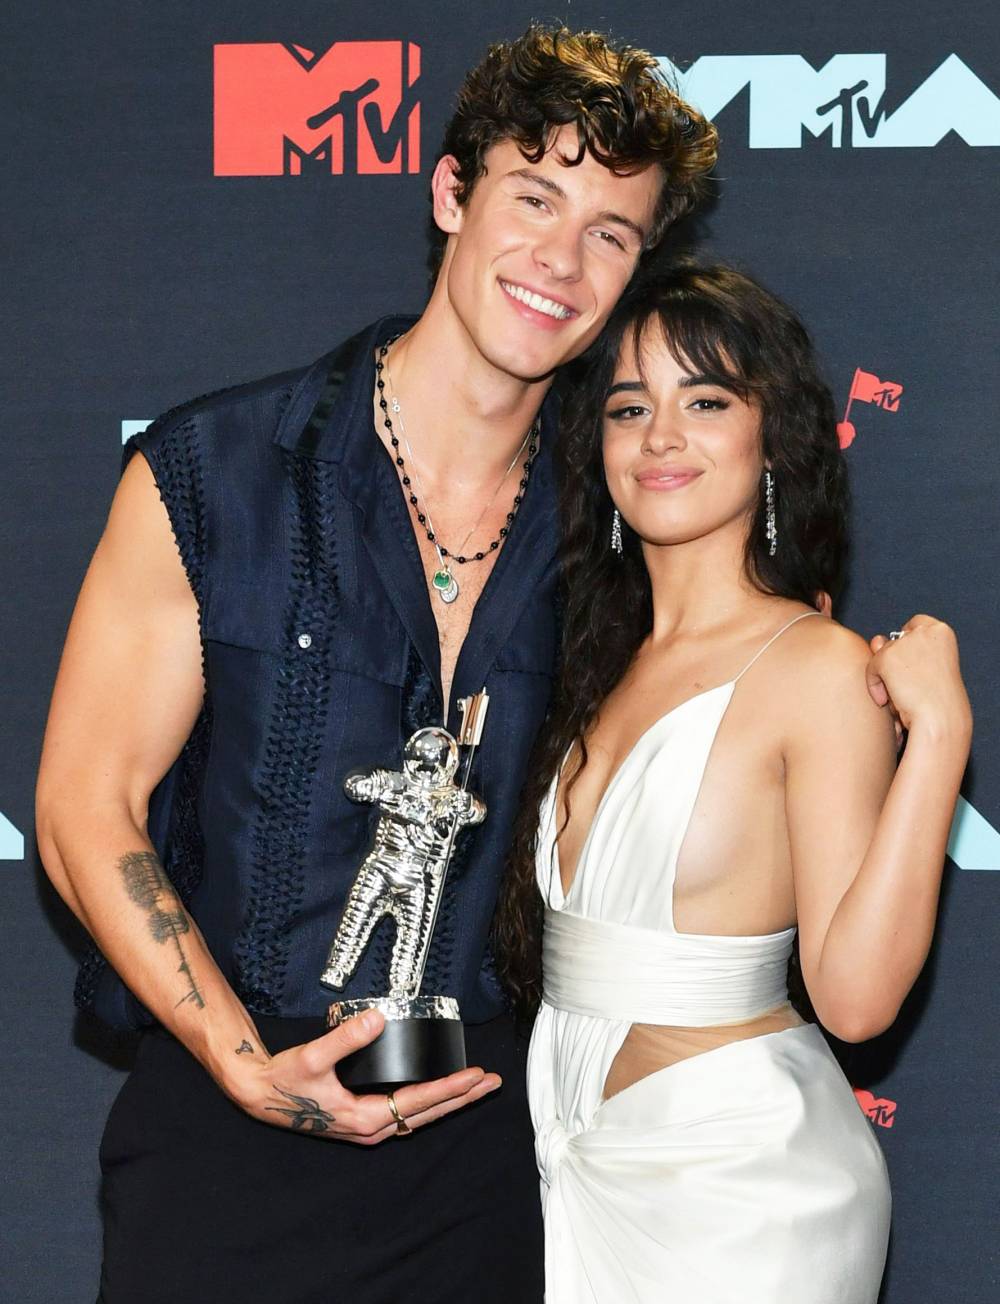 Camila Cabello and Shawn Mendes' Matching Bond Touch Bracelets